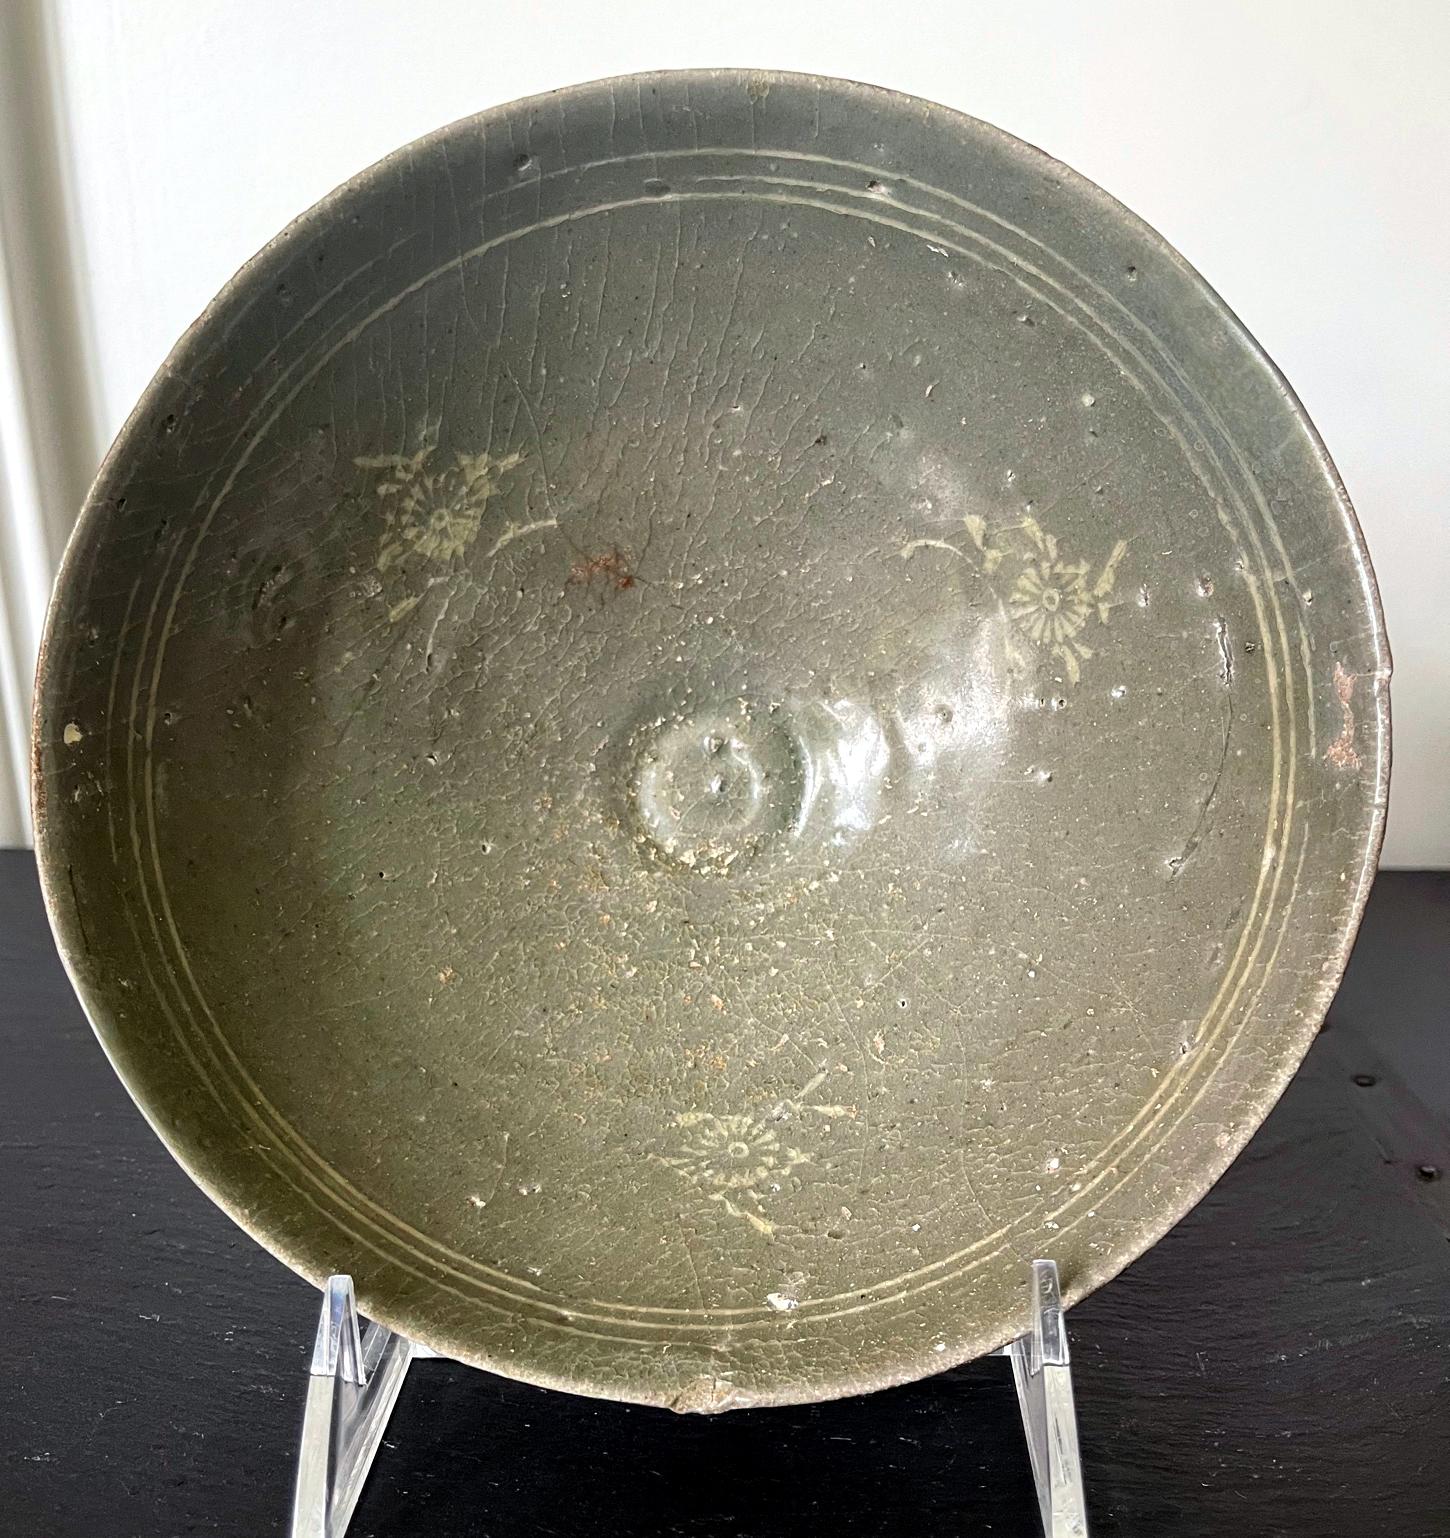 The celadon bowl on offer here was likely dated to the 14th century toward the end of Goryeo Dynasty, after the production quality reached its zenith during 11-12th century. The bowl was apparently wheel-thrown, slightly misshaped, and with a more